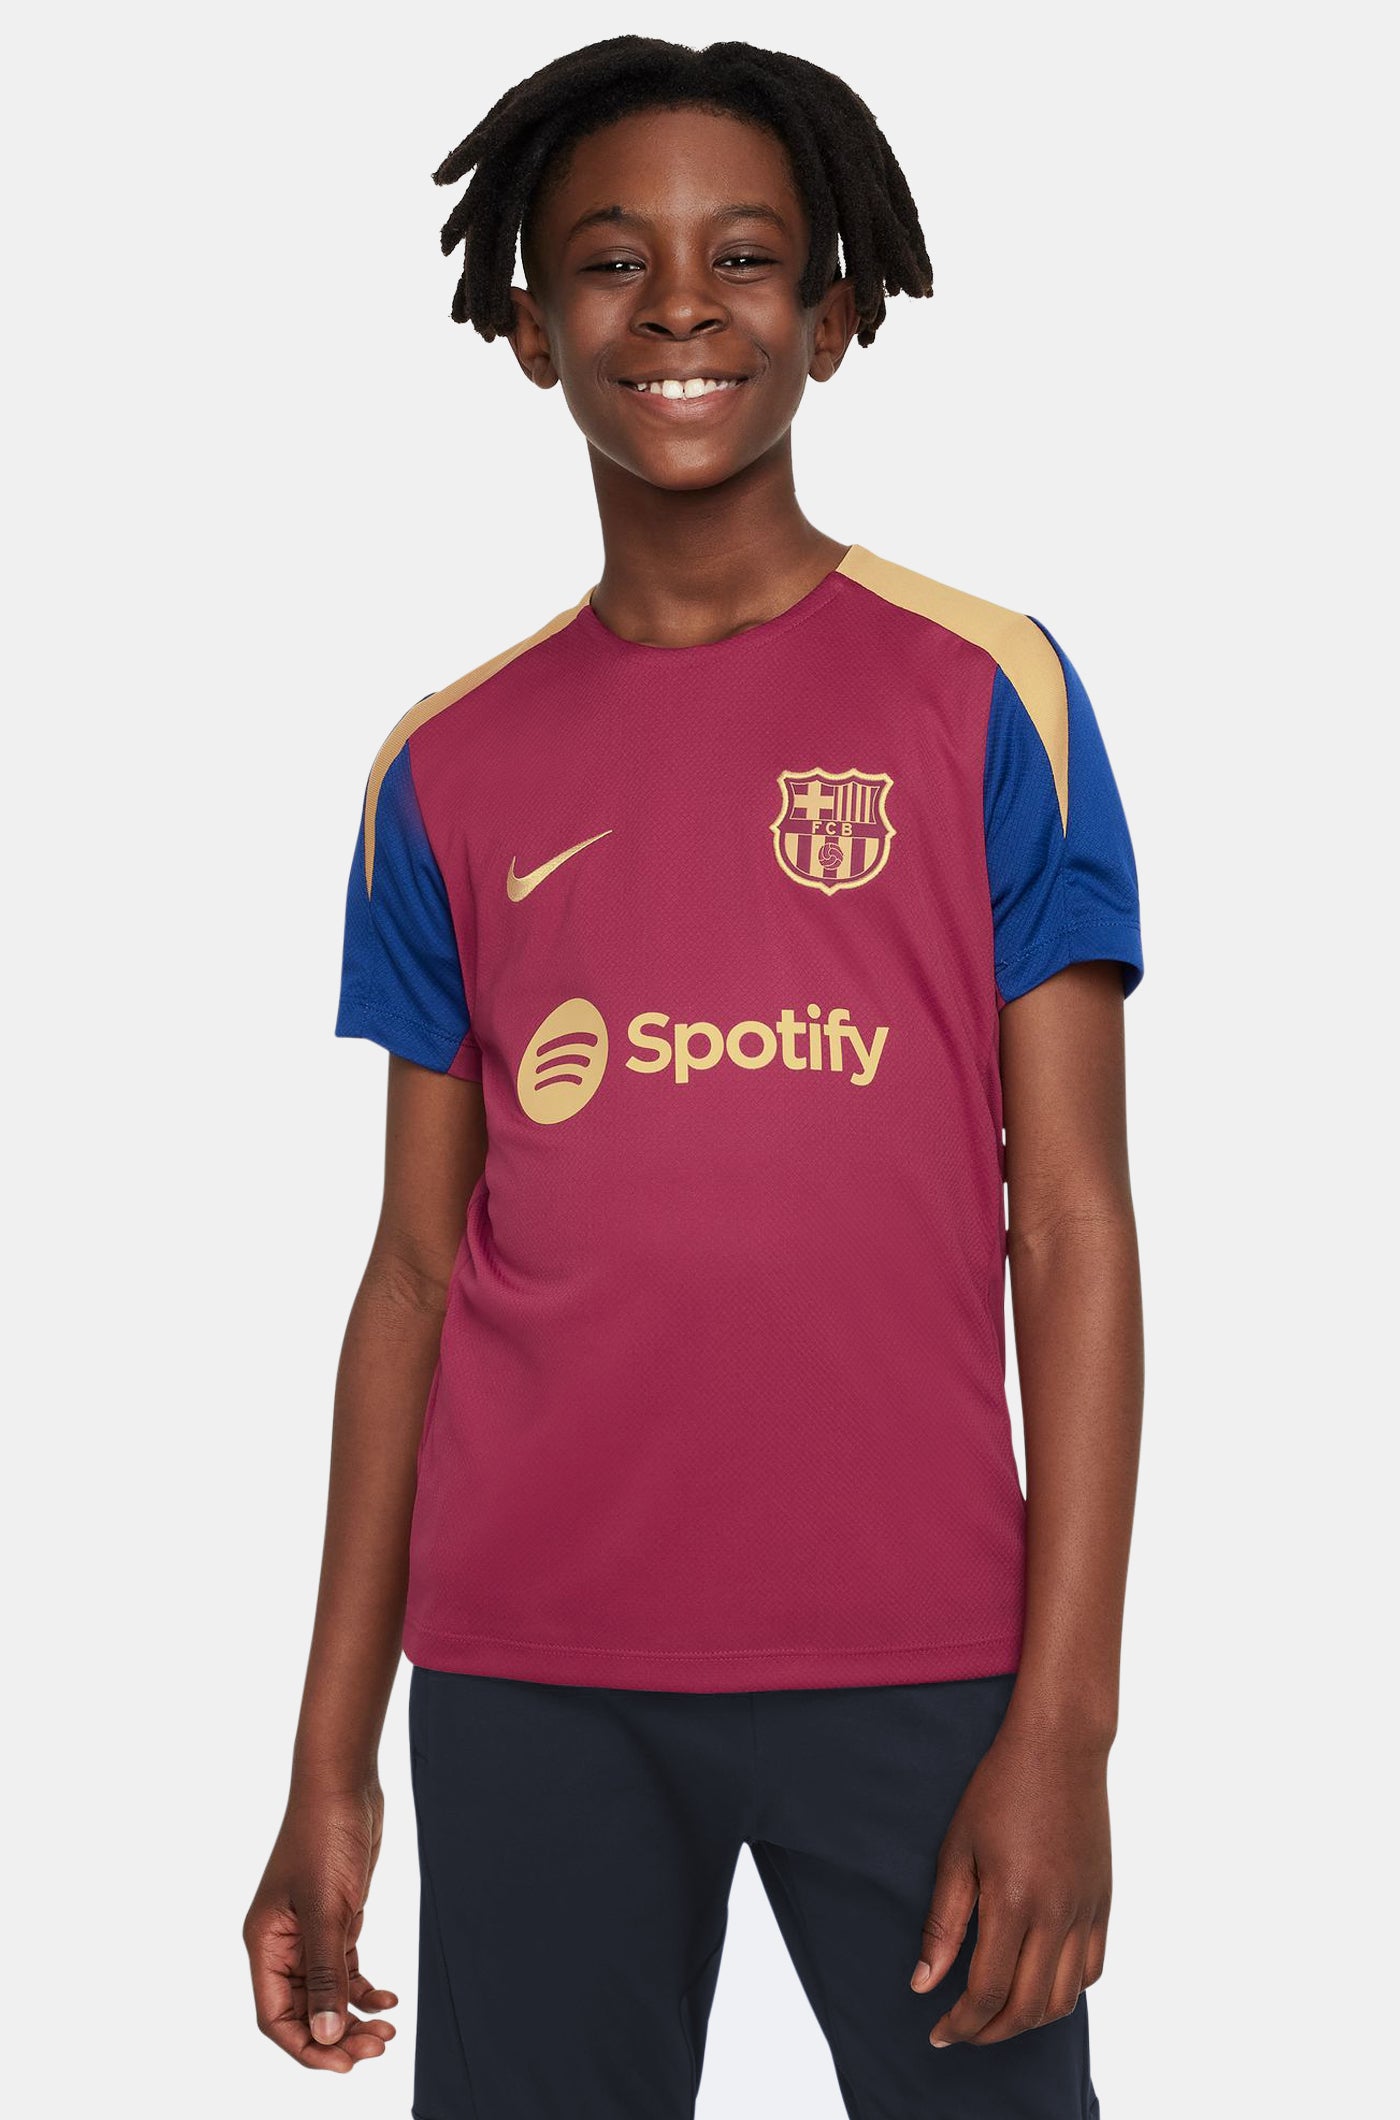 Women's Training Pants and Shorts – Barça Official Store Spotify Camp Nou